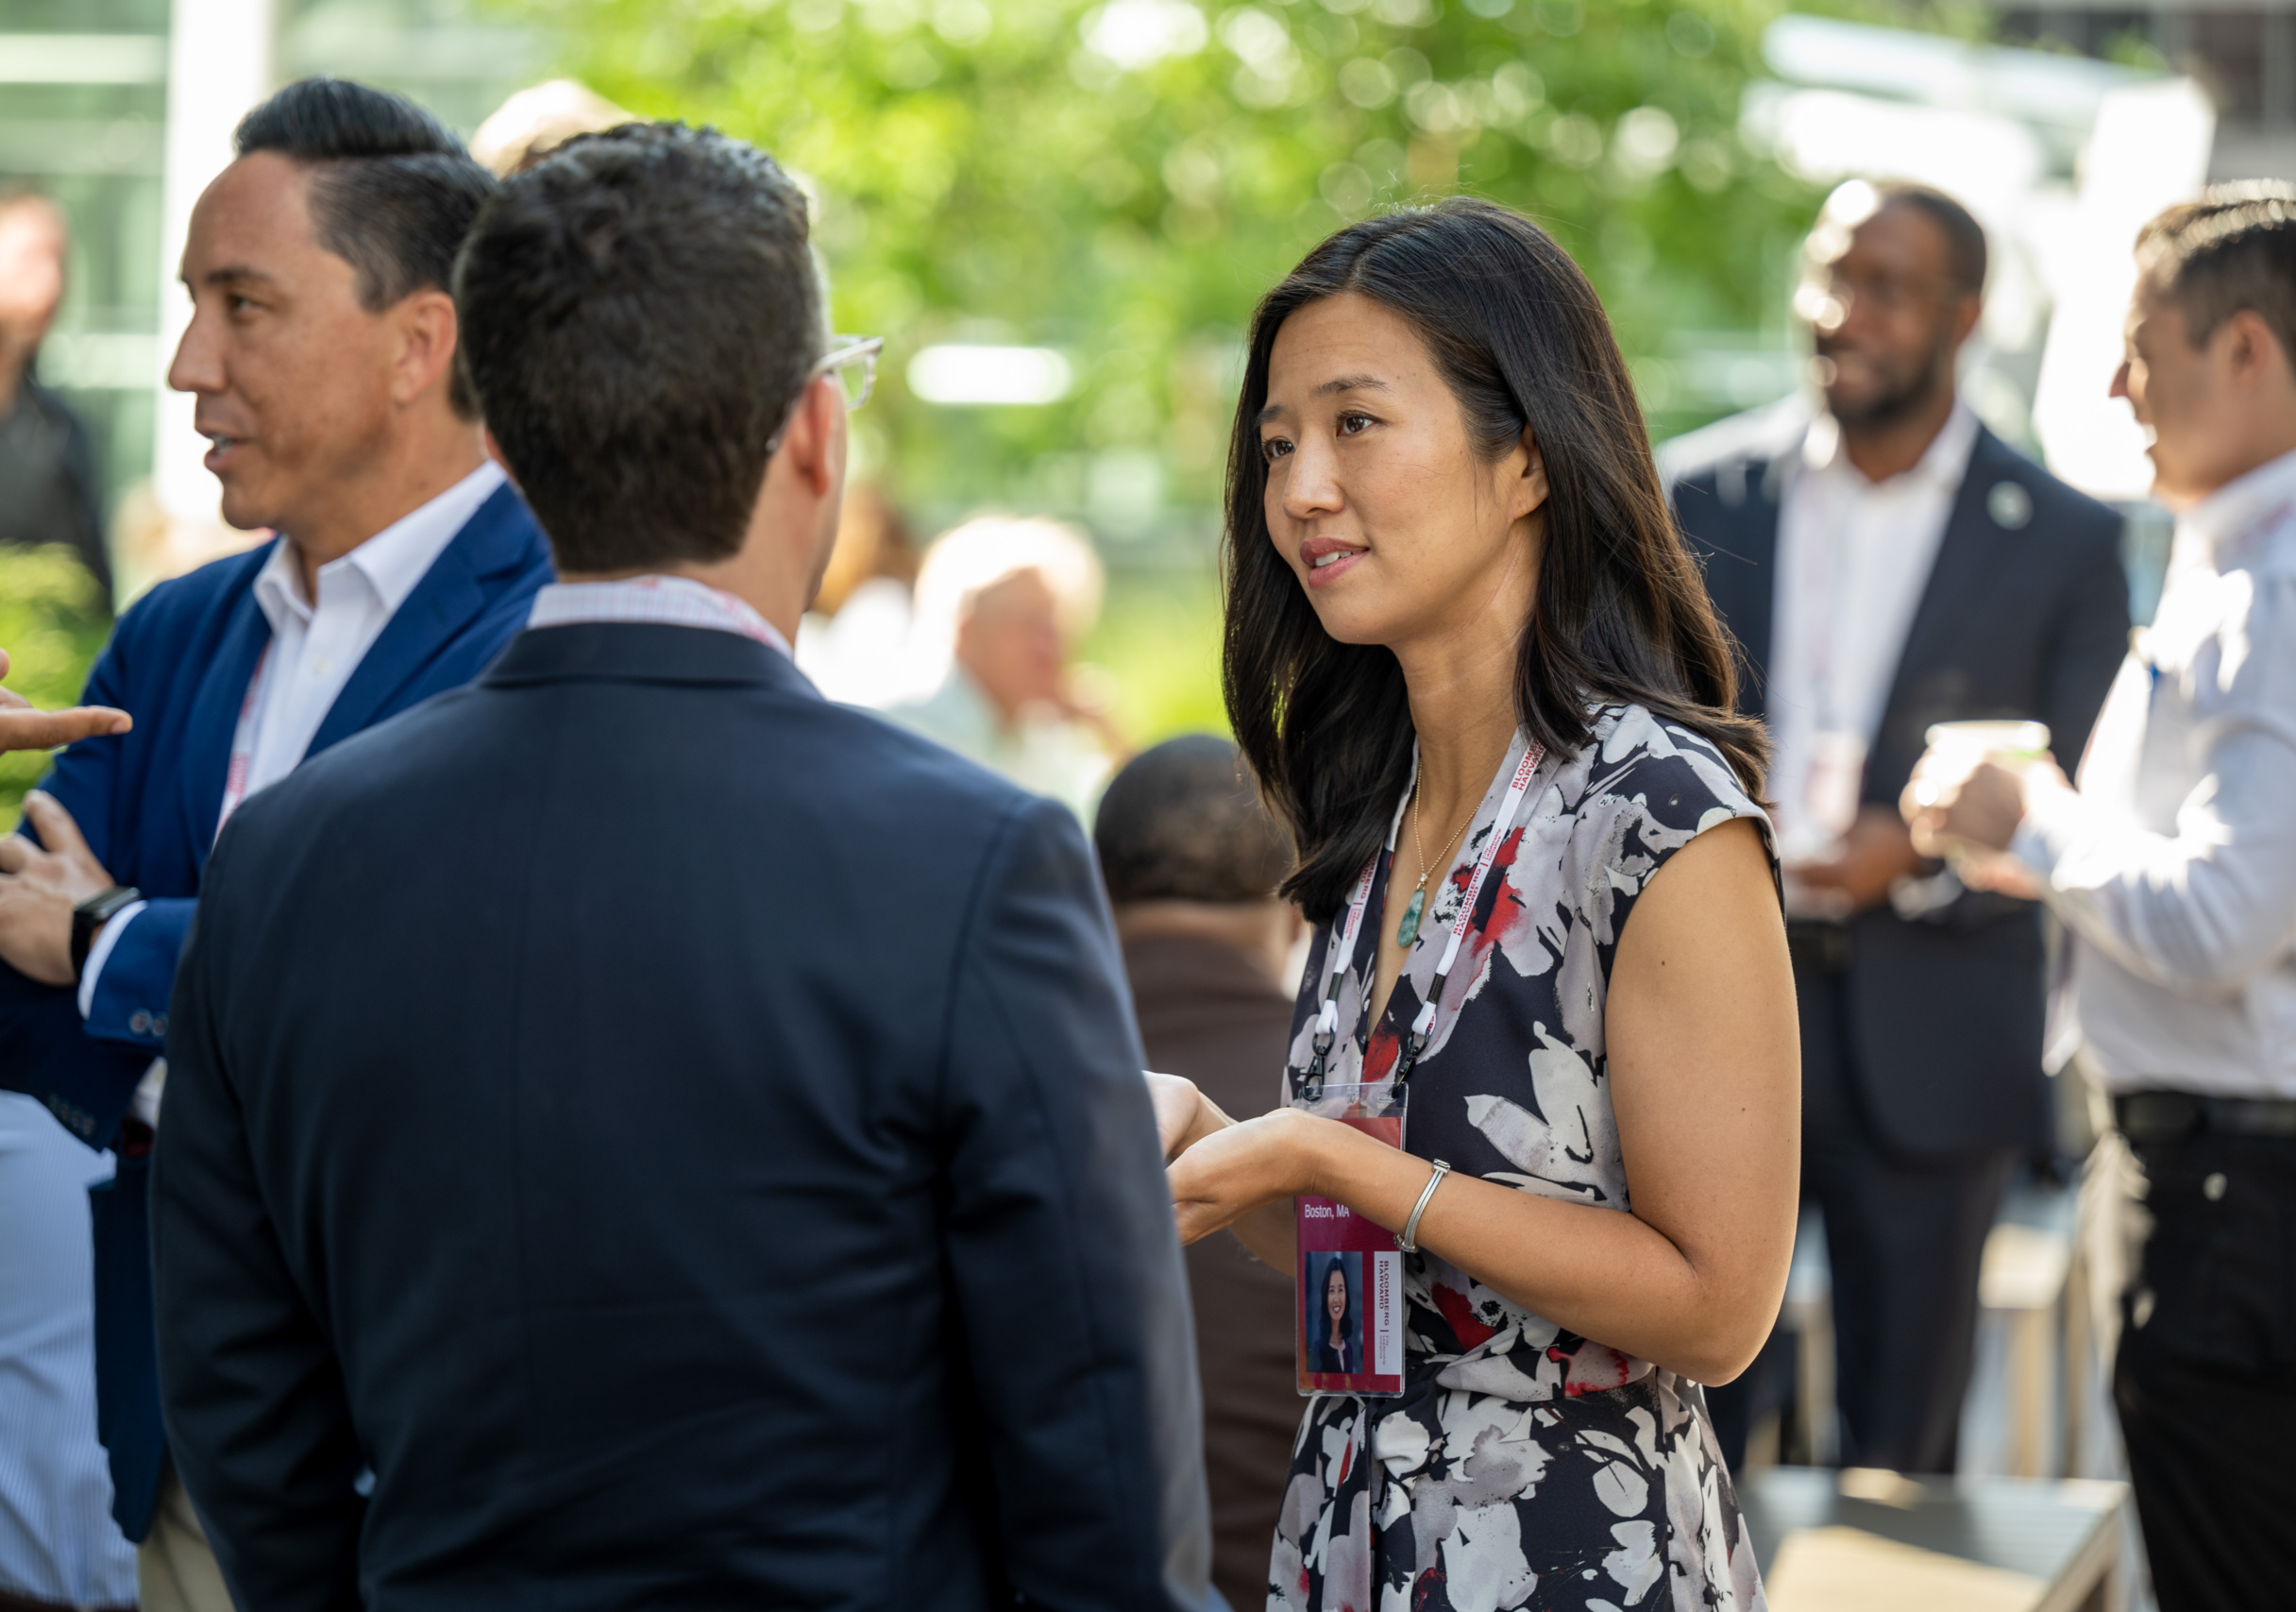 Mayor Michelle Wu of Boston, MA discusses important city work with fellow mayors and senior leaders at an outdoor summer event at Bloomberg Headquarters in New York, New York.